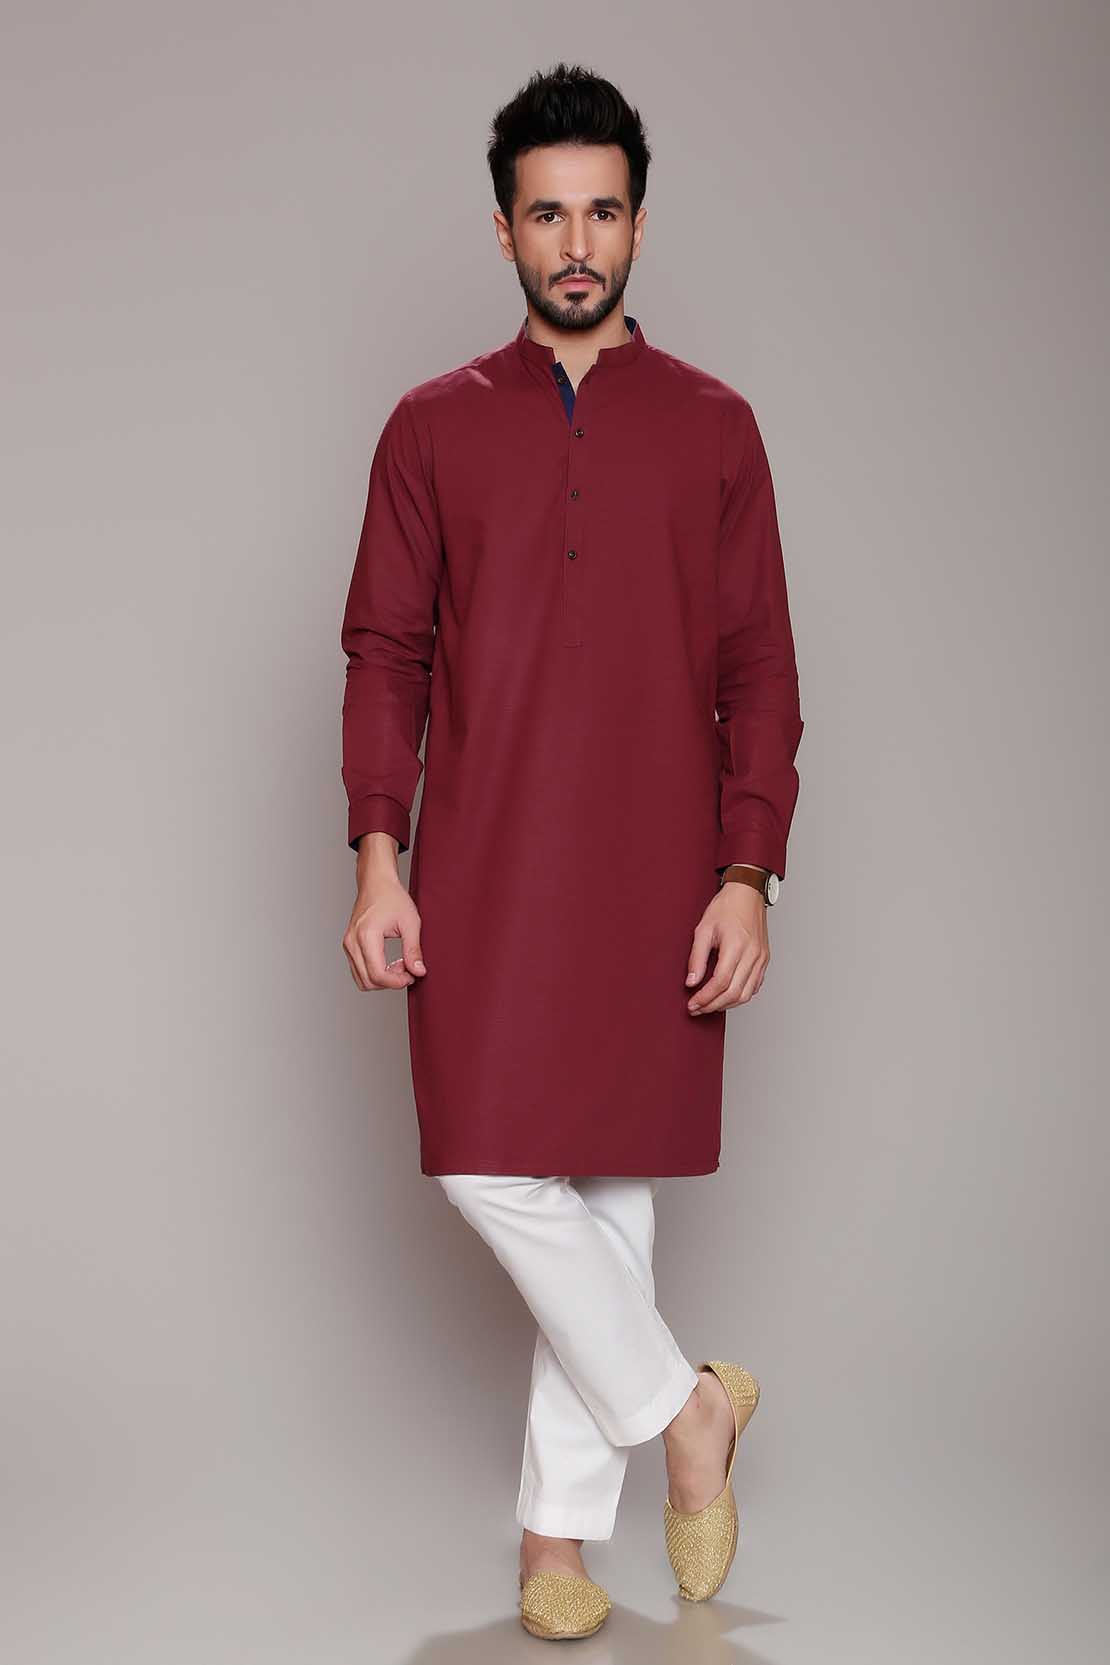 Latest Men Modern Kurta Styles Designs Collection 2019 by Chinyere ...